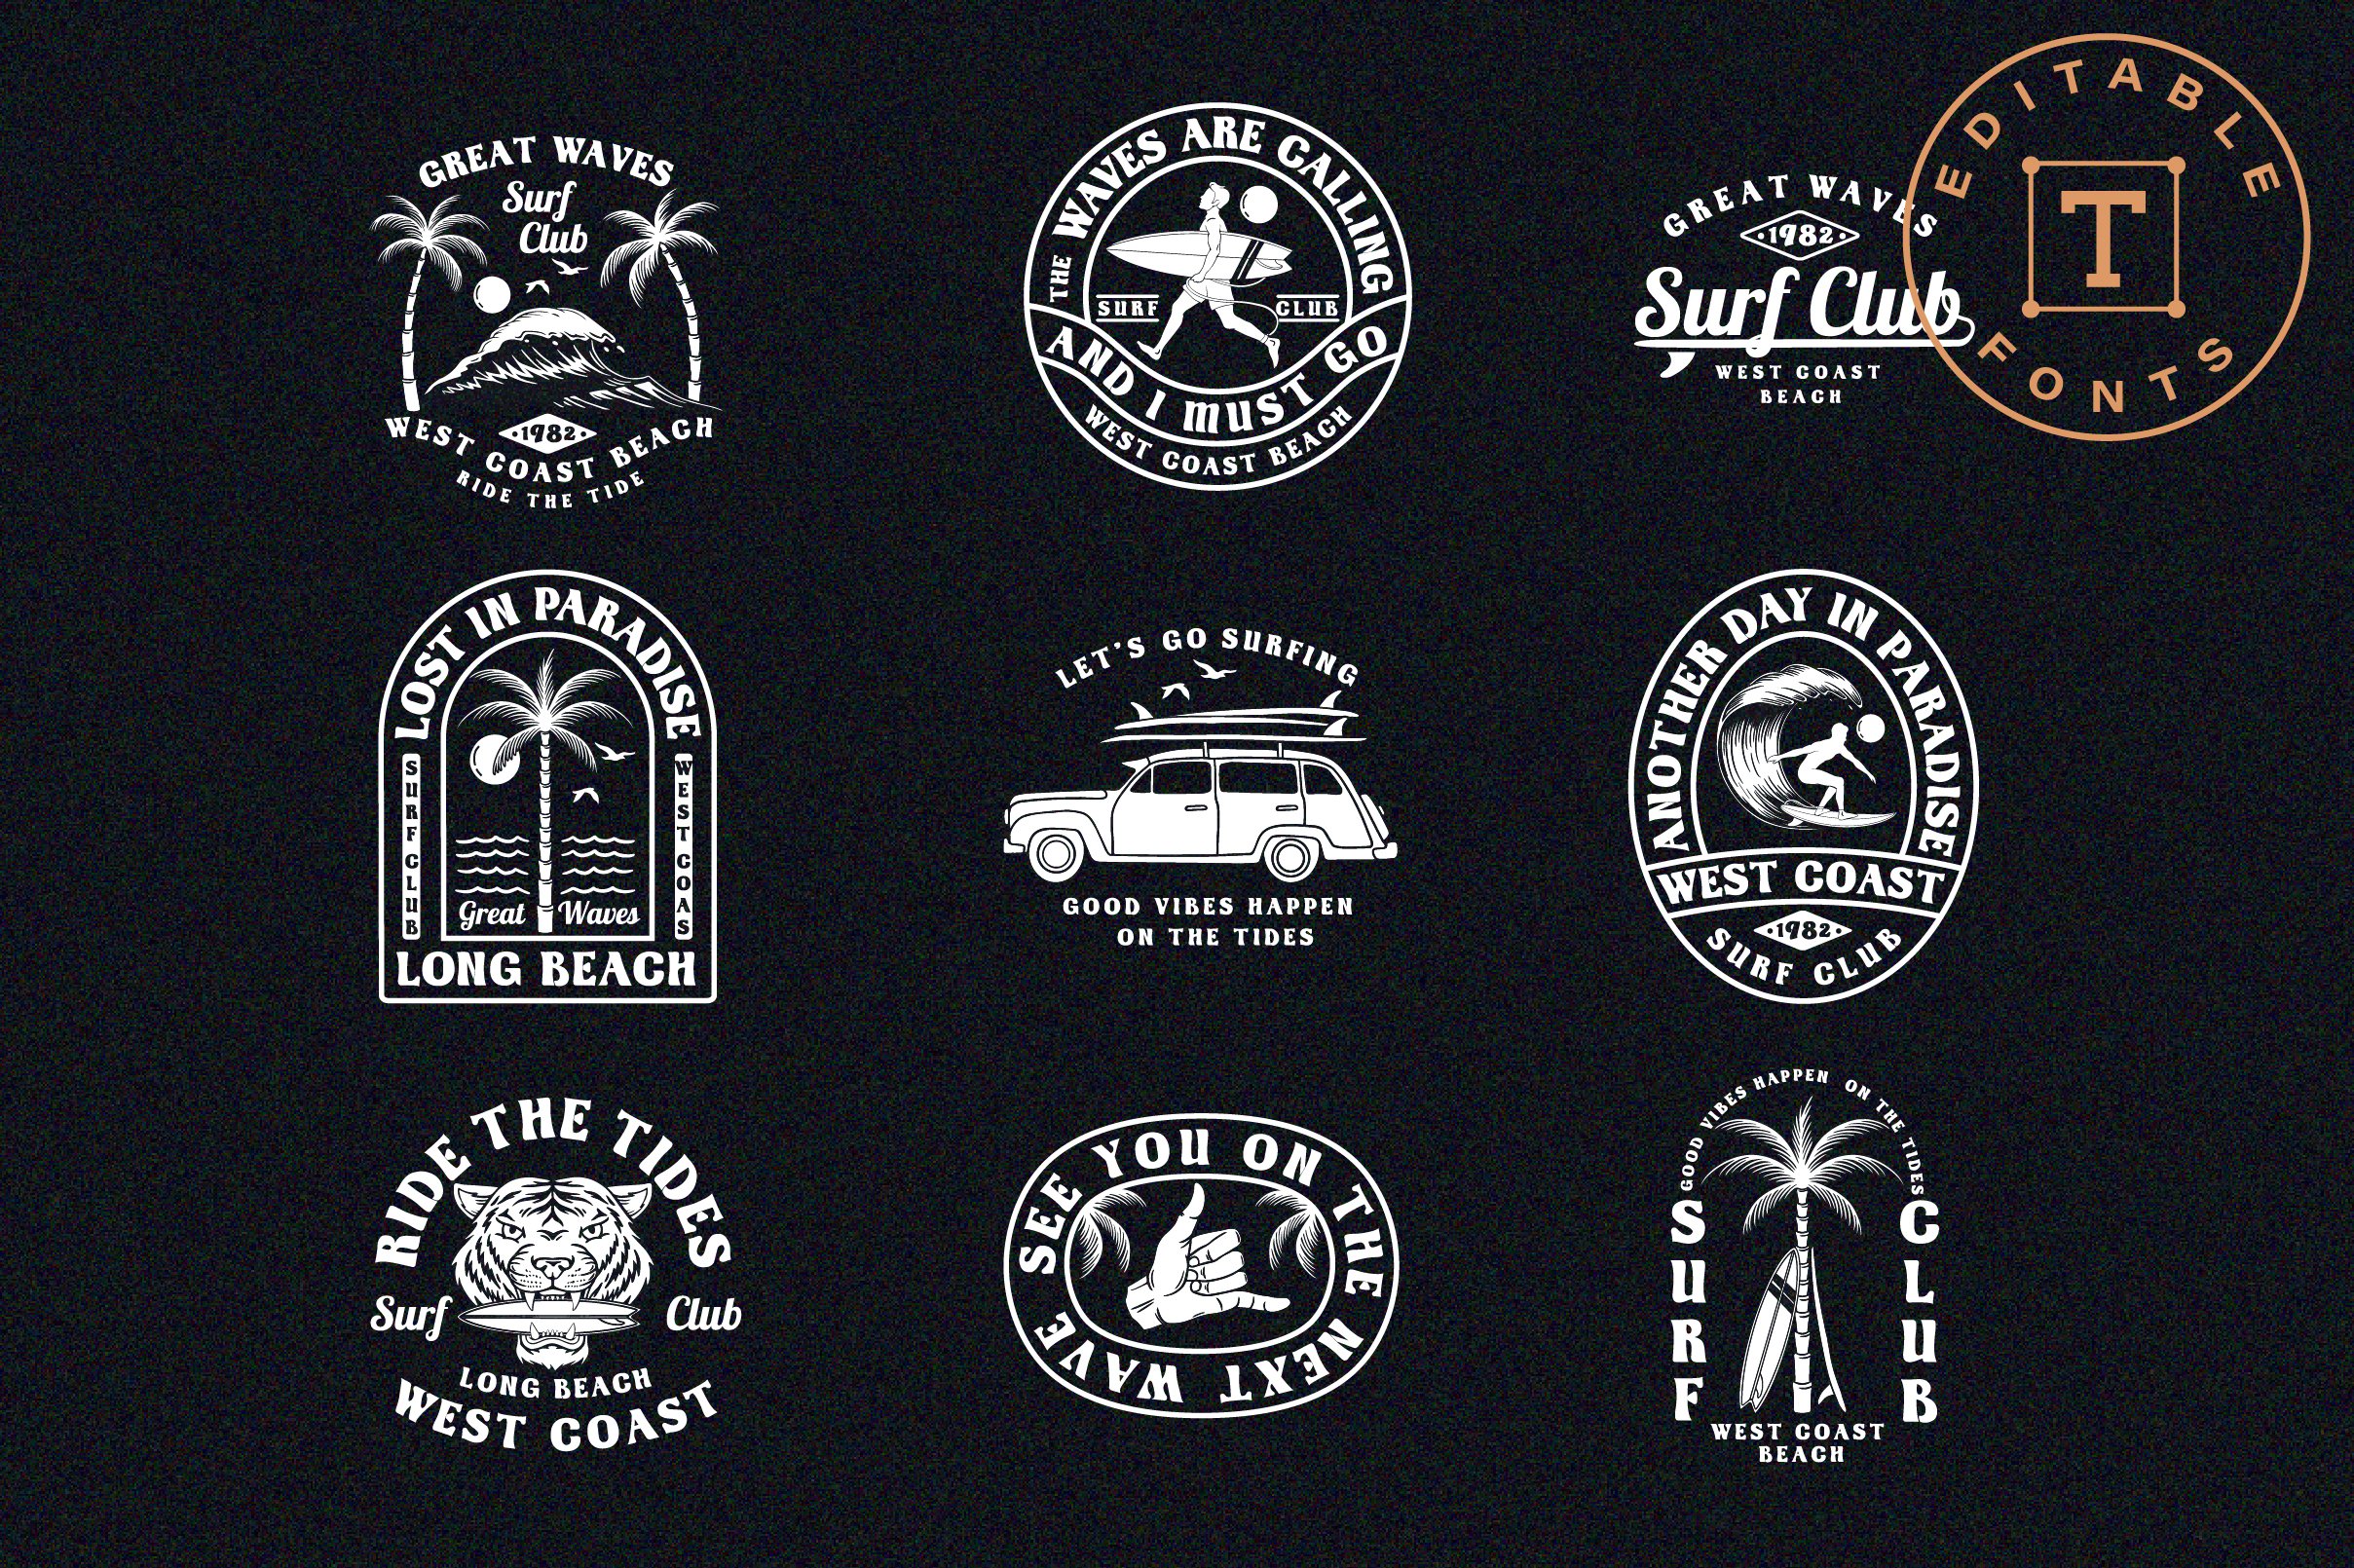 Modern surfing logos created by vintage font.